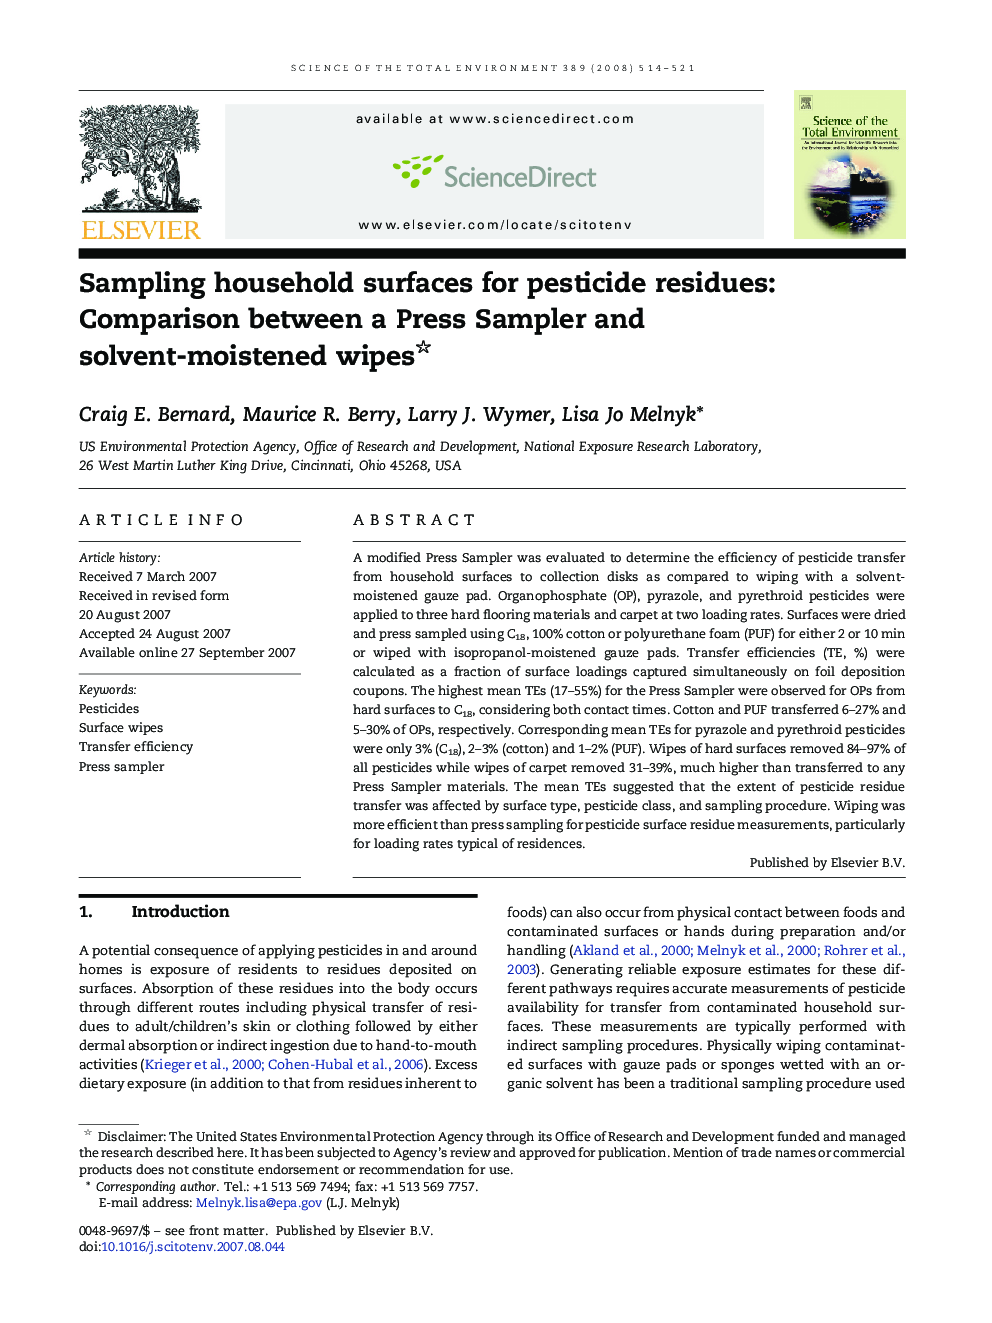 Sampling household surfaces for pesticide residues: Comparison between a Press Sampler and solvent-moistened wipes 